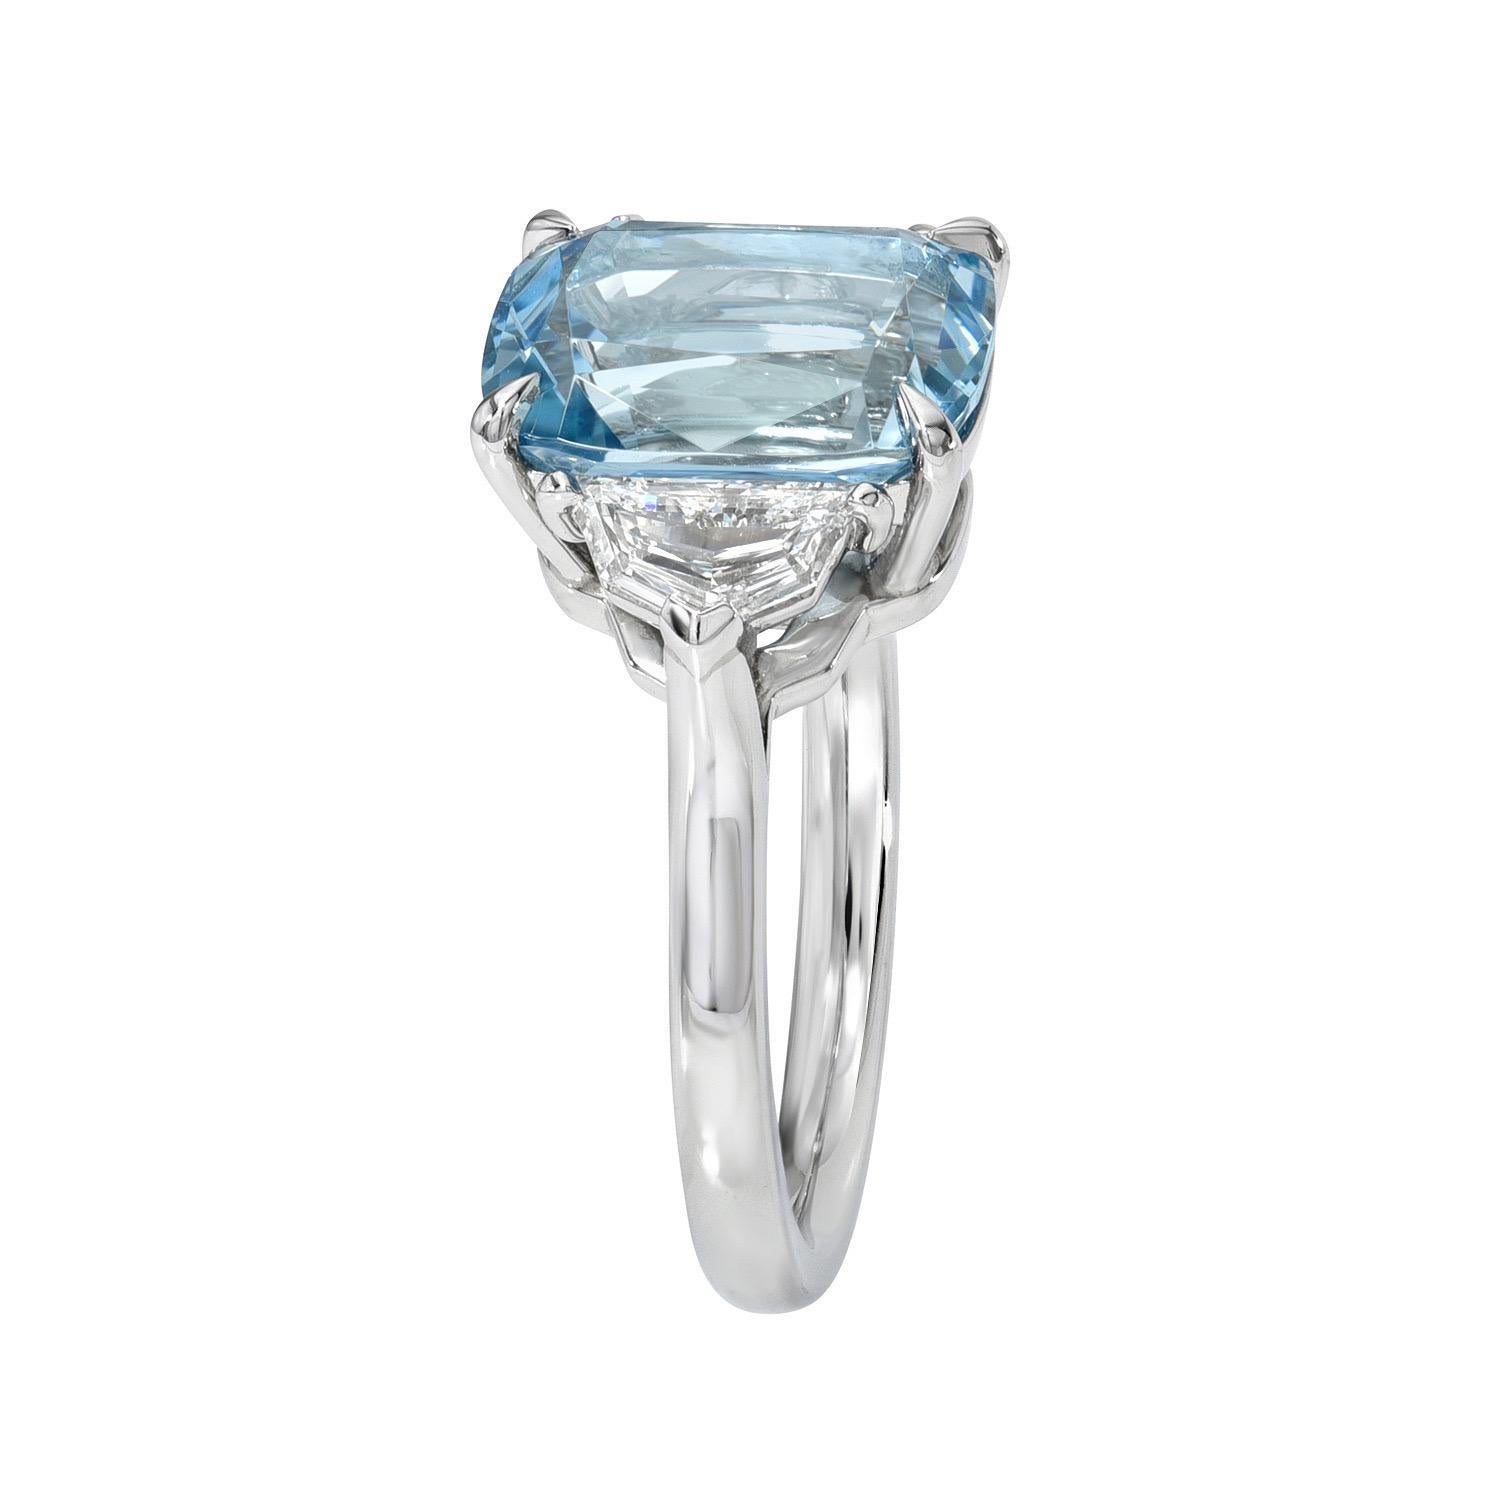 Very special 3.47 carat elongated cushion Aquamarine, three stone platinum ring, decorated with a pair of 0.62 carats, F color/VS1 clarity, 